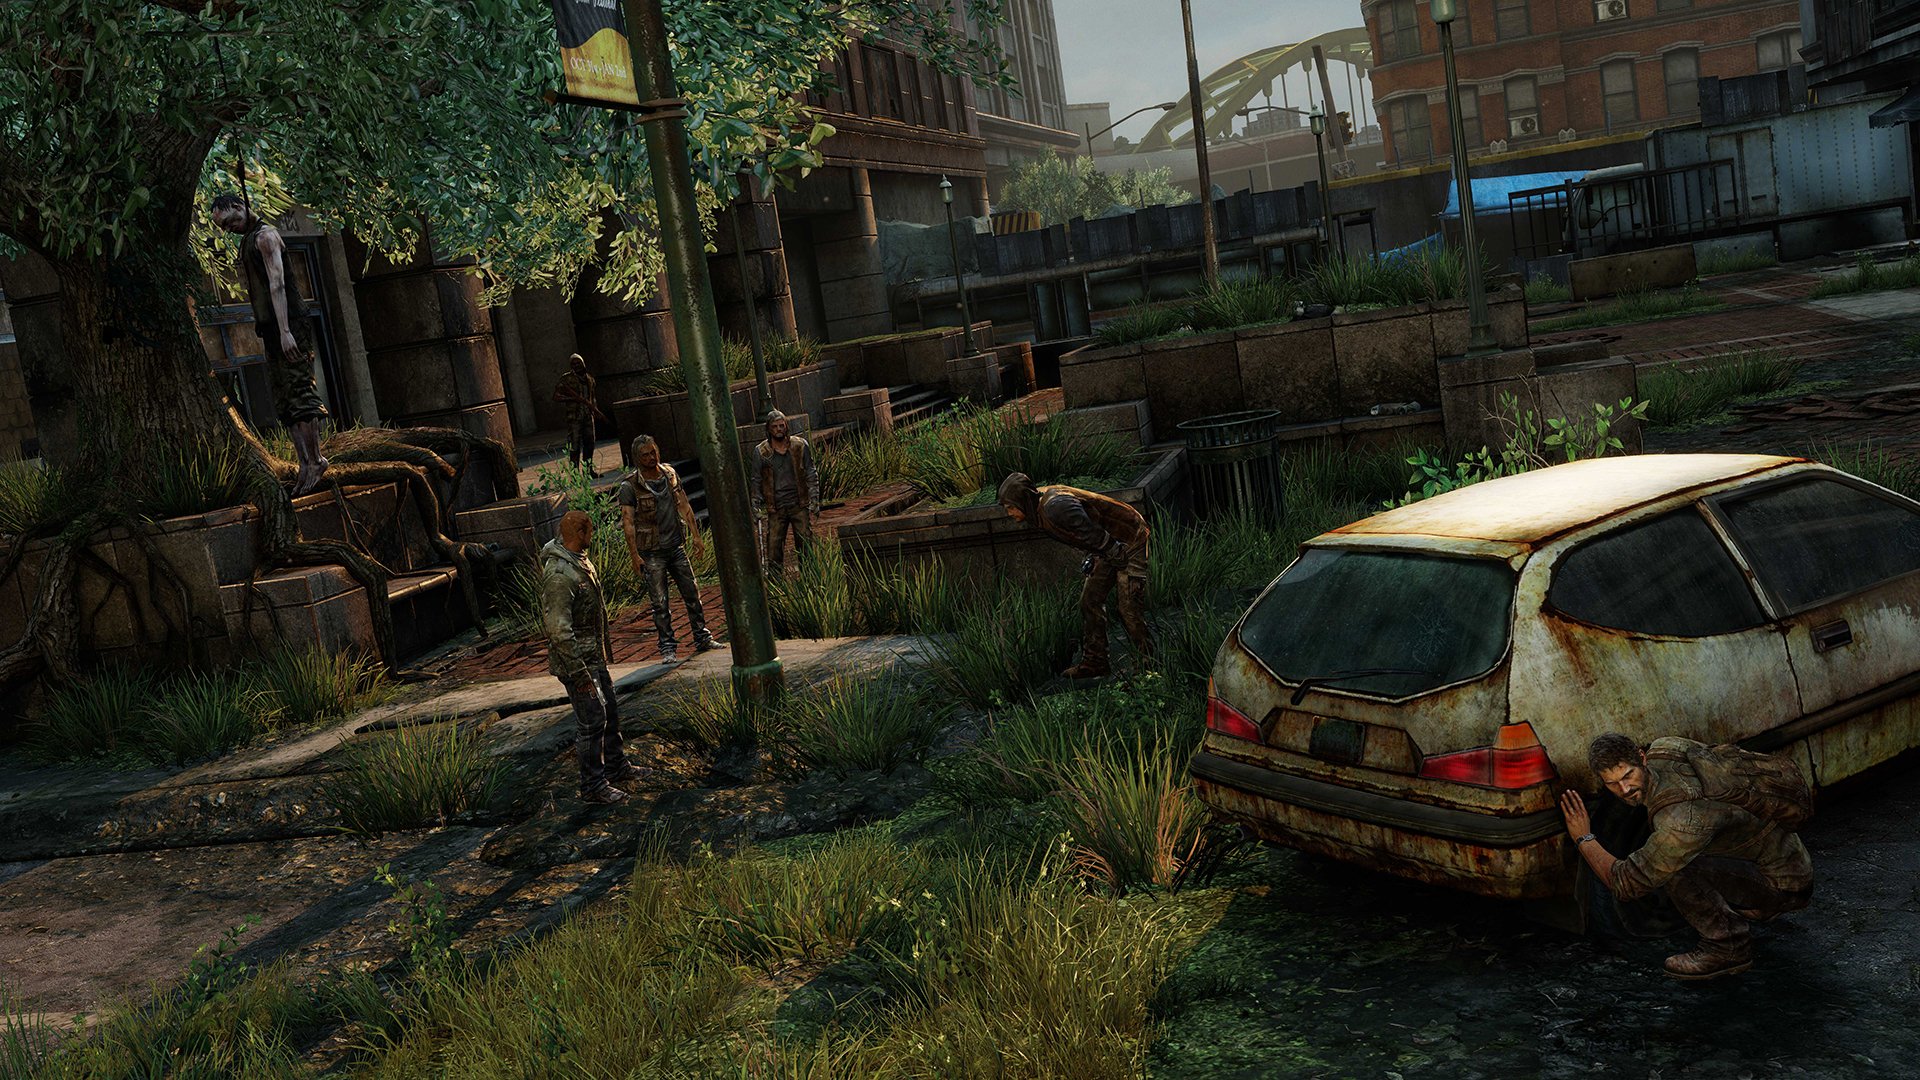 the last of us remastered download